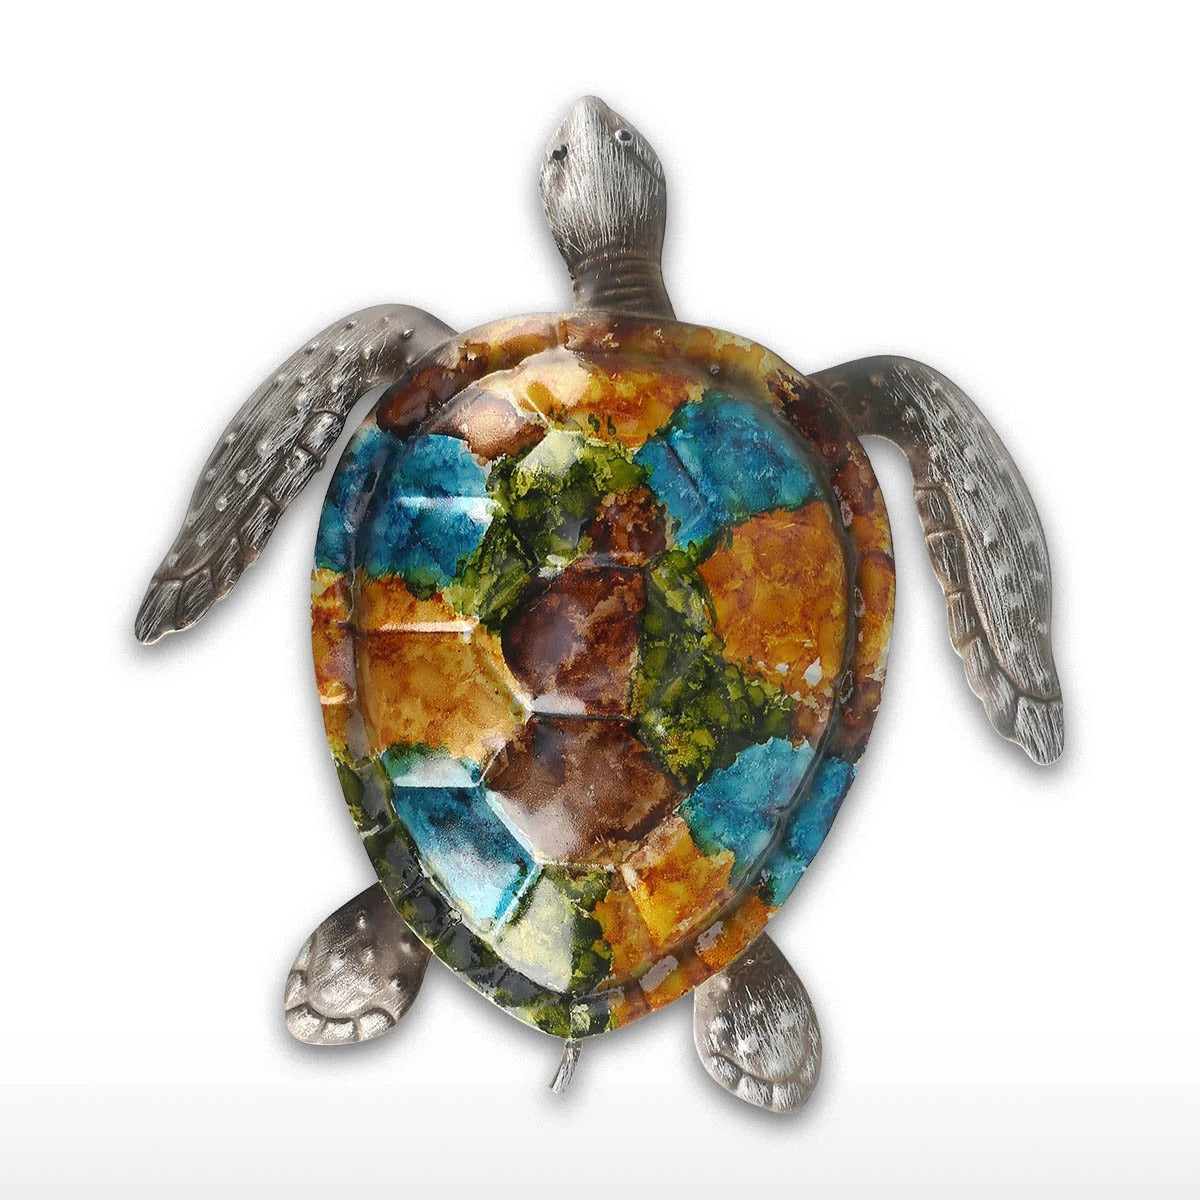 Cute and Baby Sea Turtle Wall Art Decor by Metal Ocean Figurines